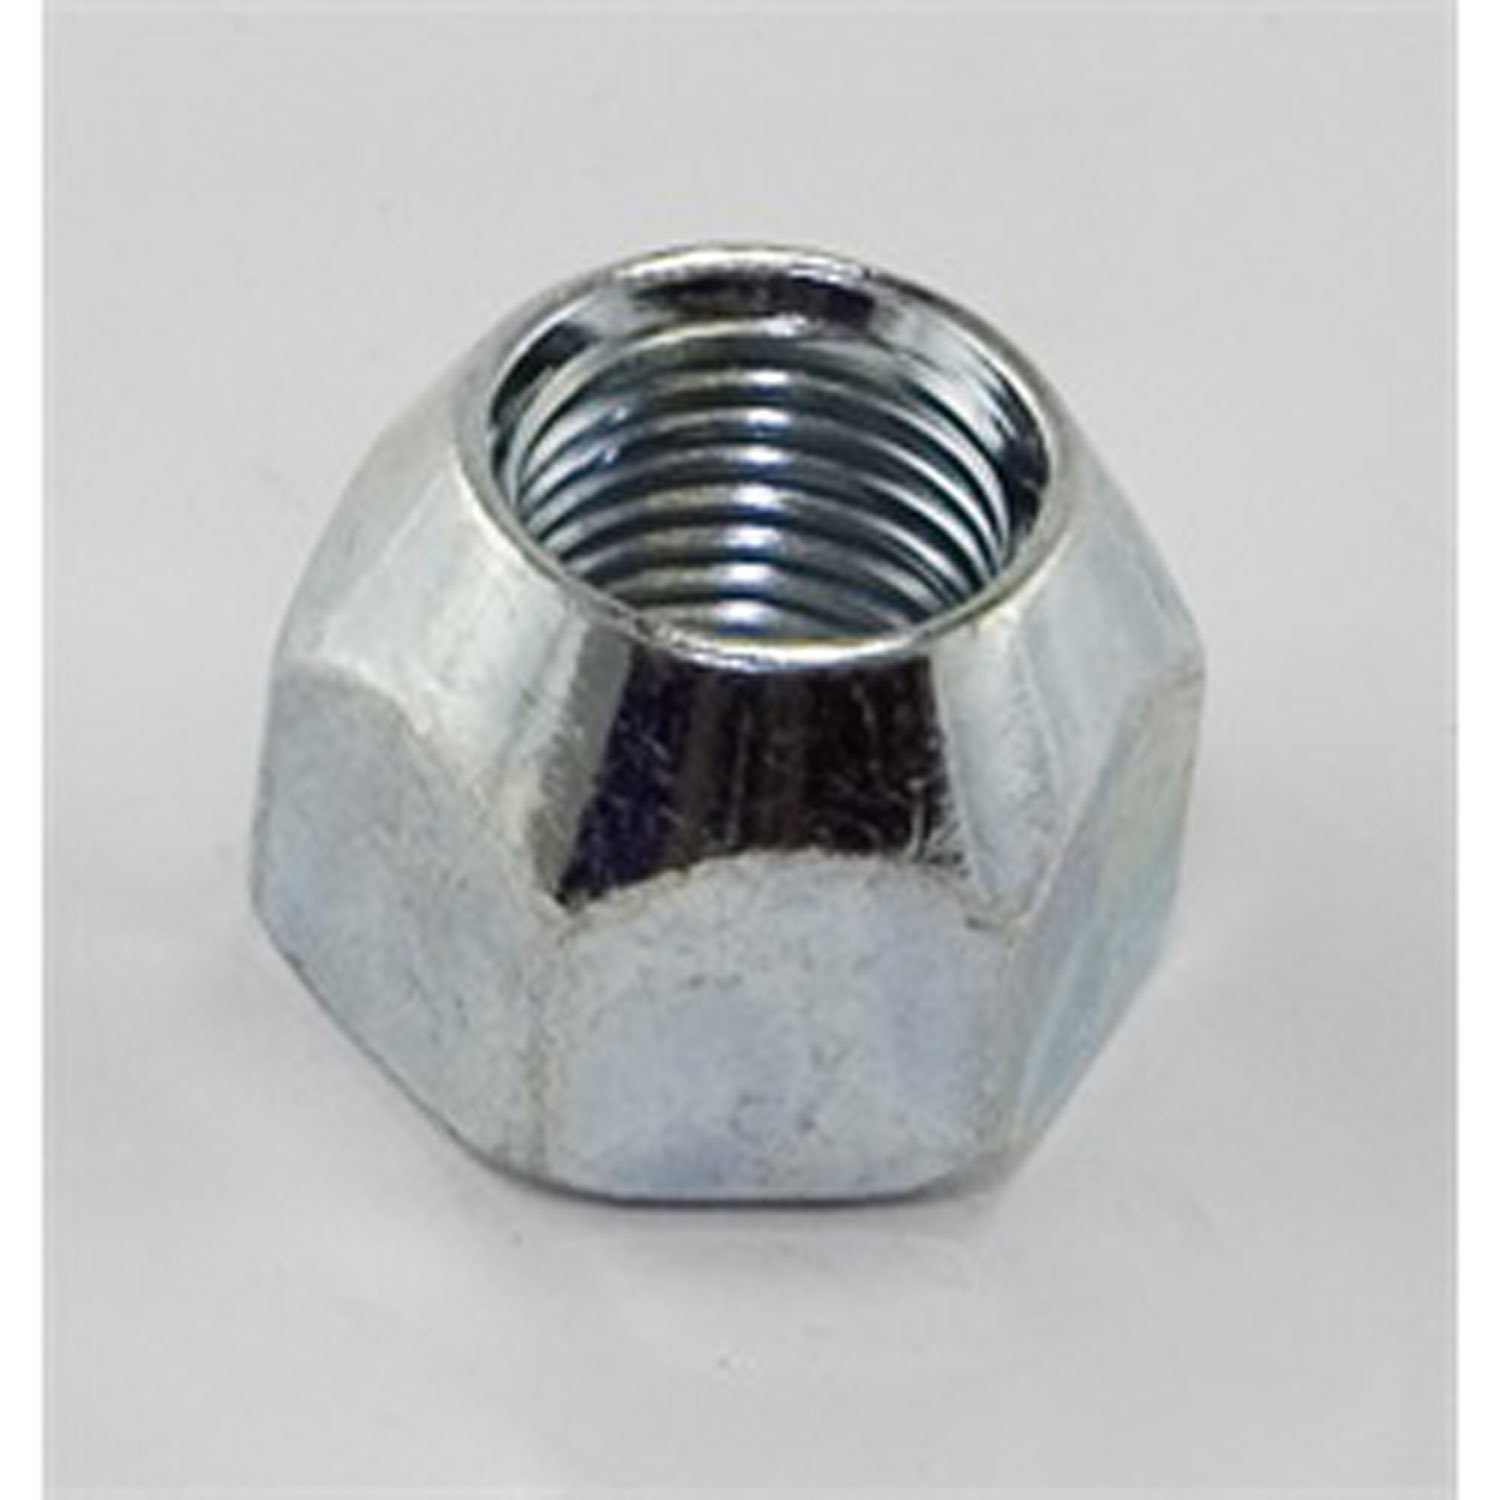 Replacement lug nut from Omix-ADA has left hand threads and, Fits 46-71 Willys and Jeep models